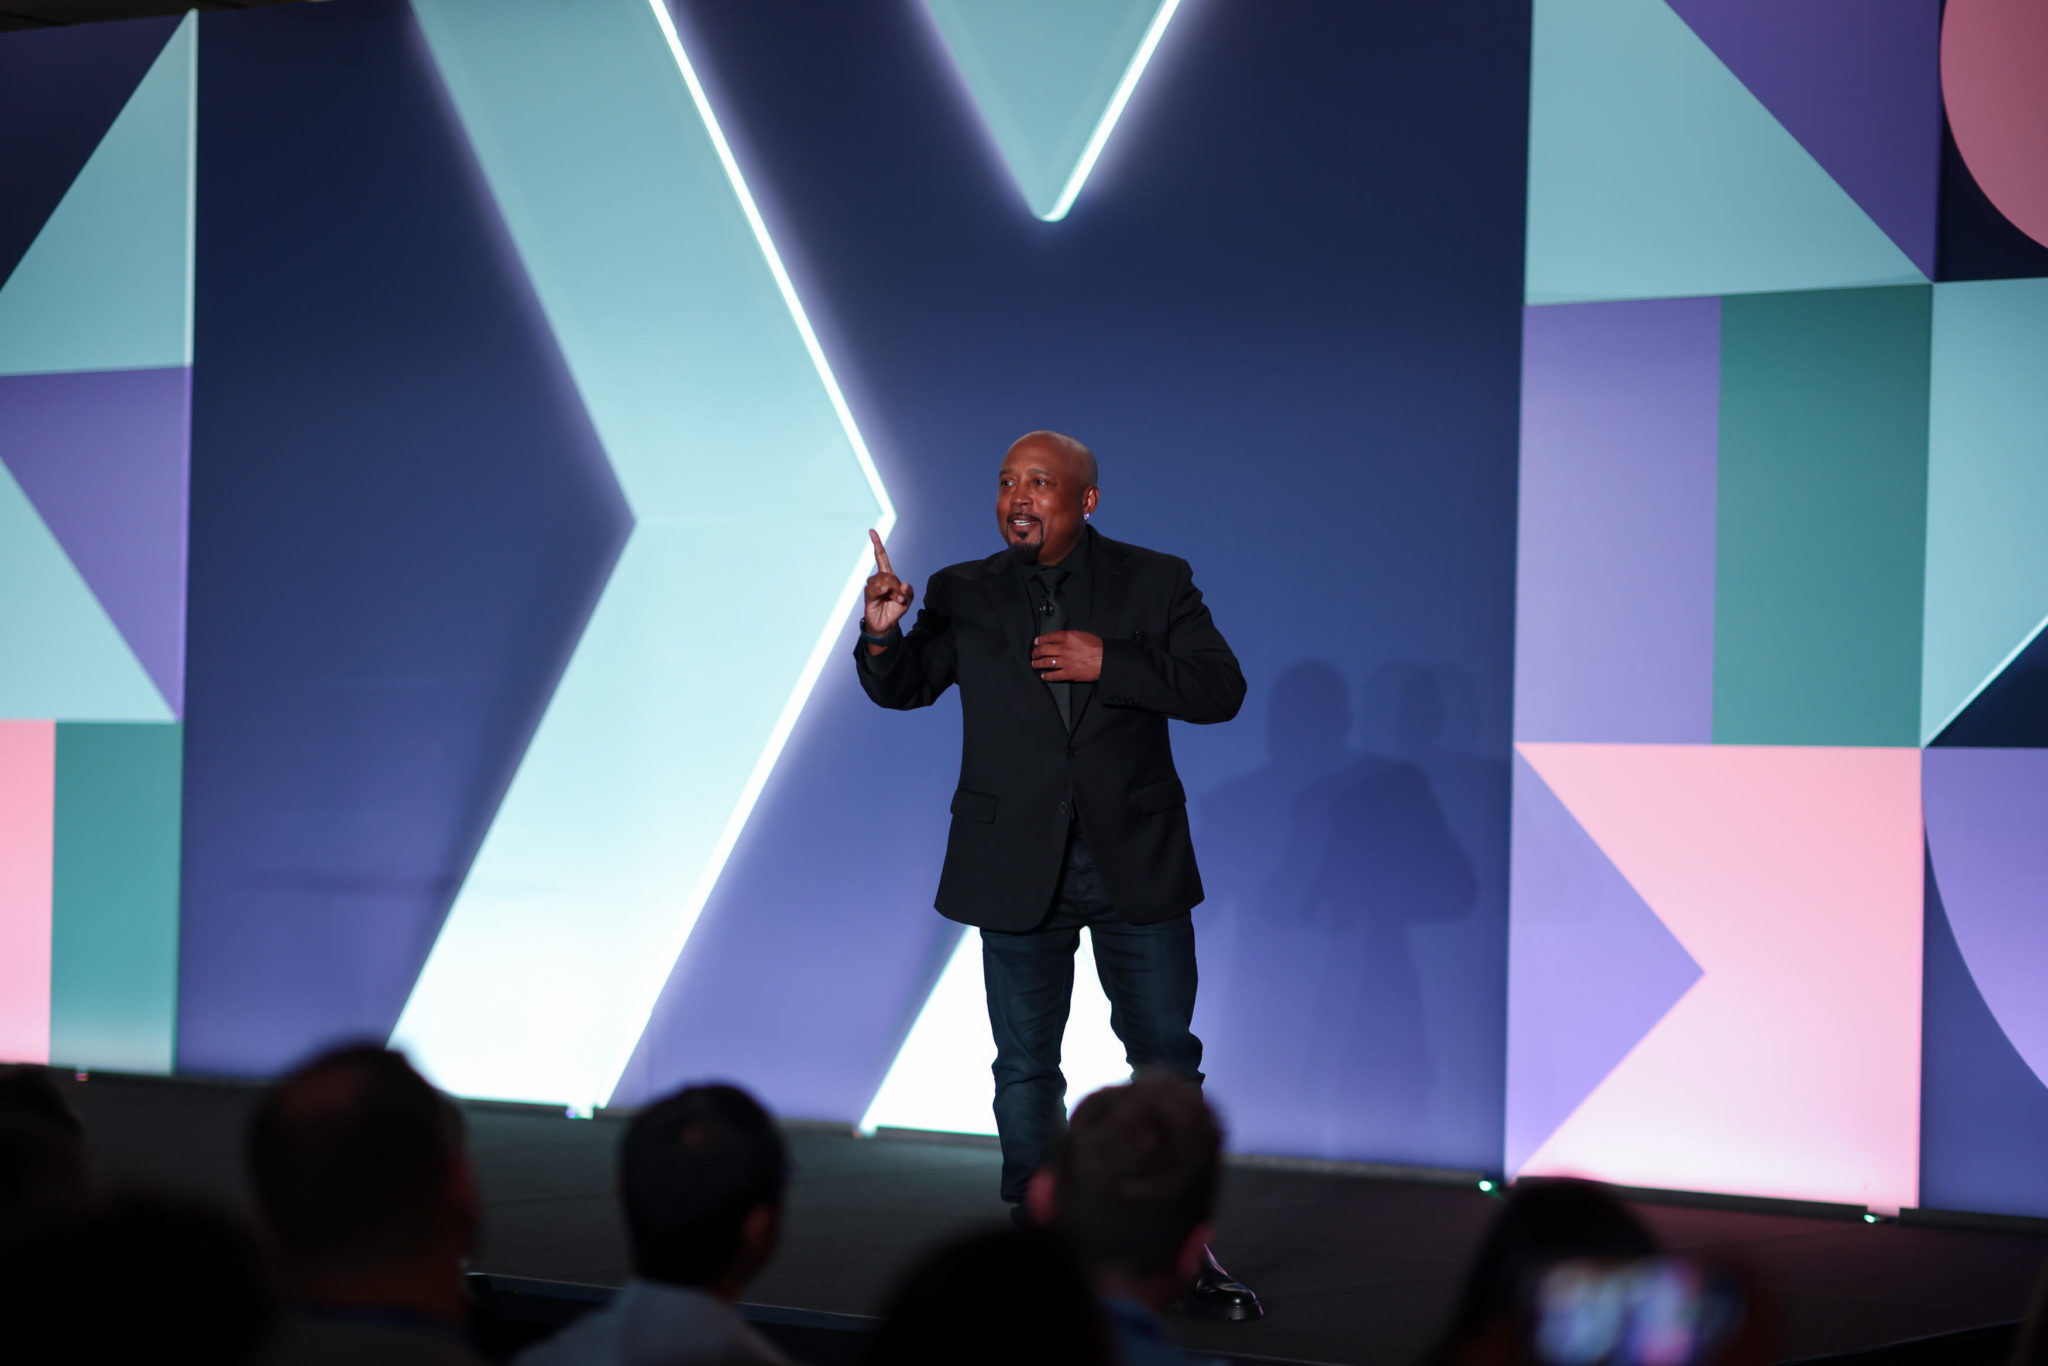 Daymond John standing on stage presenting to the audience in front of the ChargeX branding.